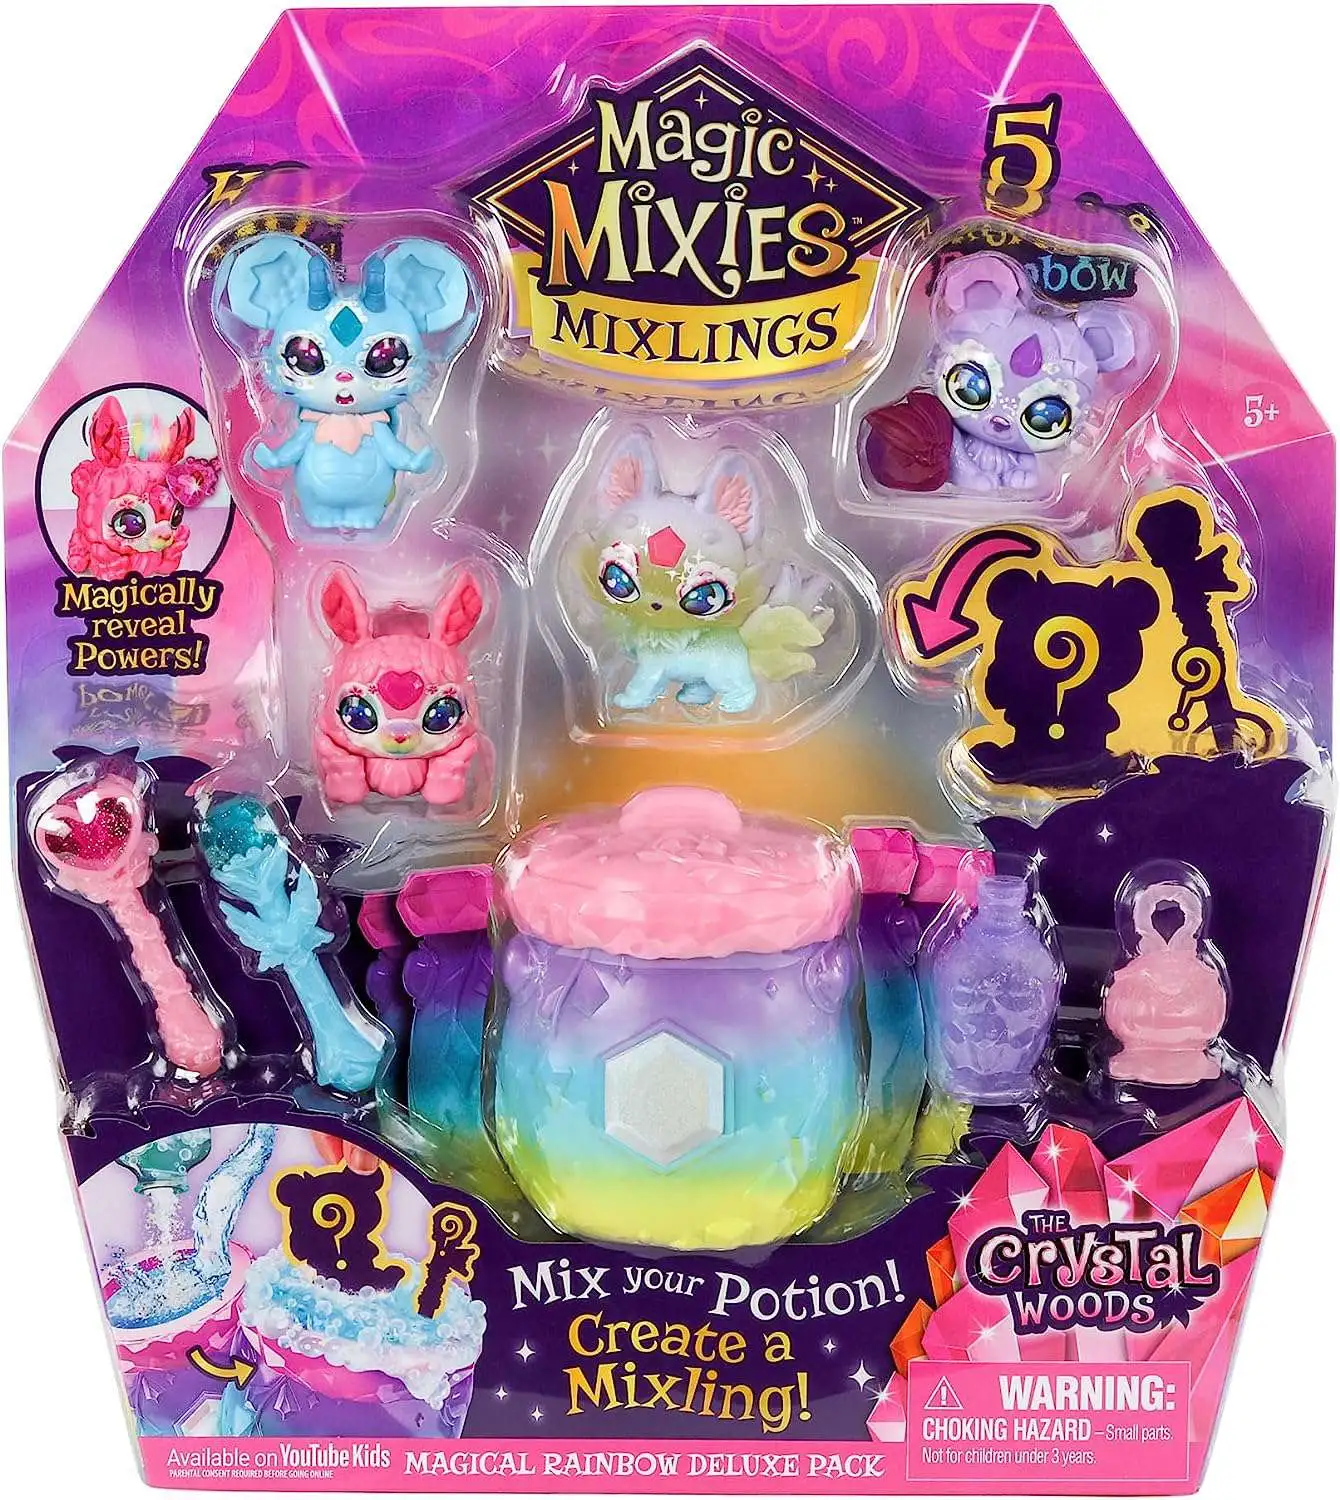 Magic Mixies Mixlings The Crystal Woods Magical Rainbow Deluxe Figure  5-Pack 5 Exclusives Moose Toys - ToyWiz